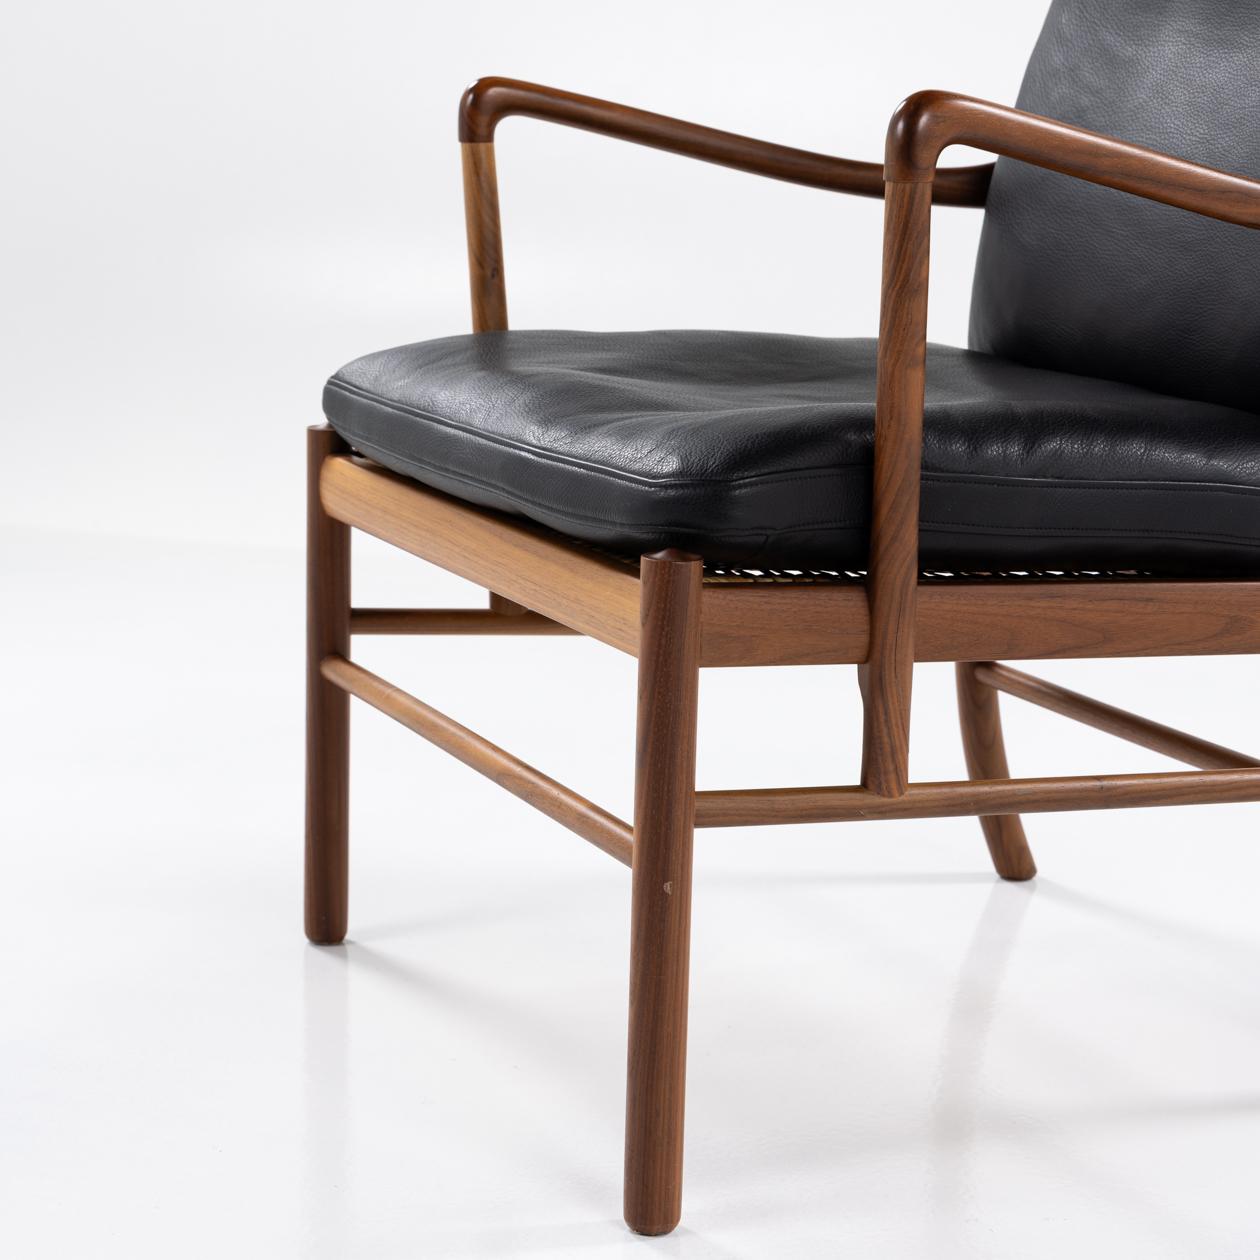 Leather PJ 149 - 'Colonial chair' in black leather and walnut by Ole Wanscher For Sale